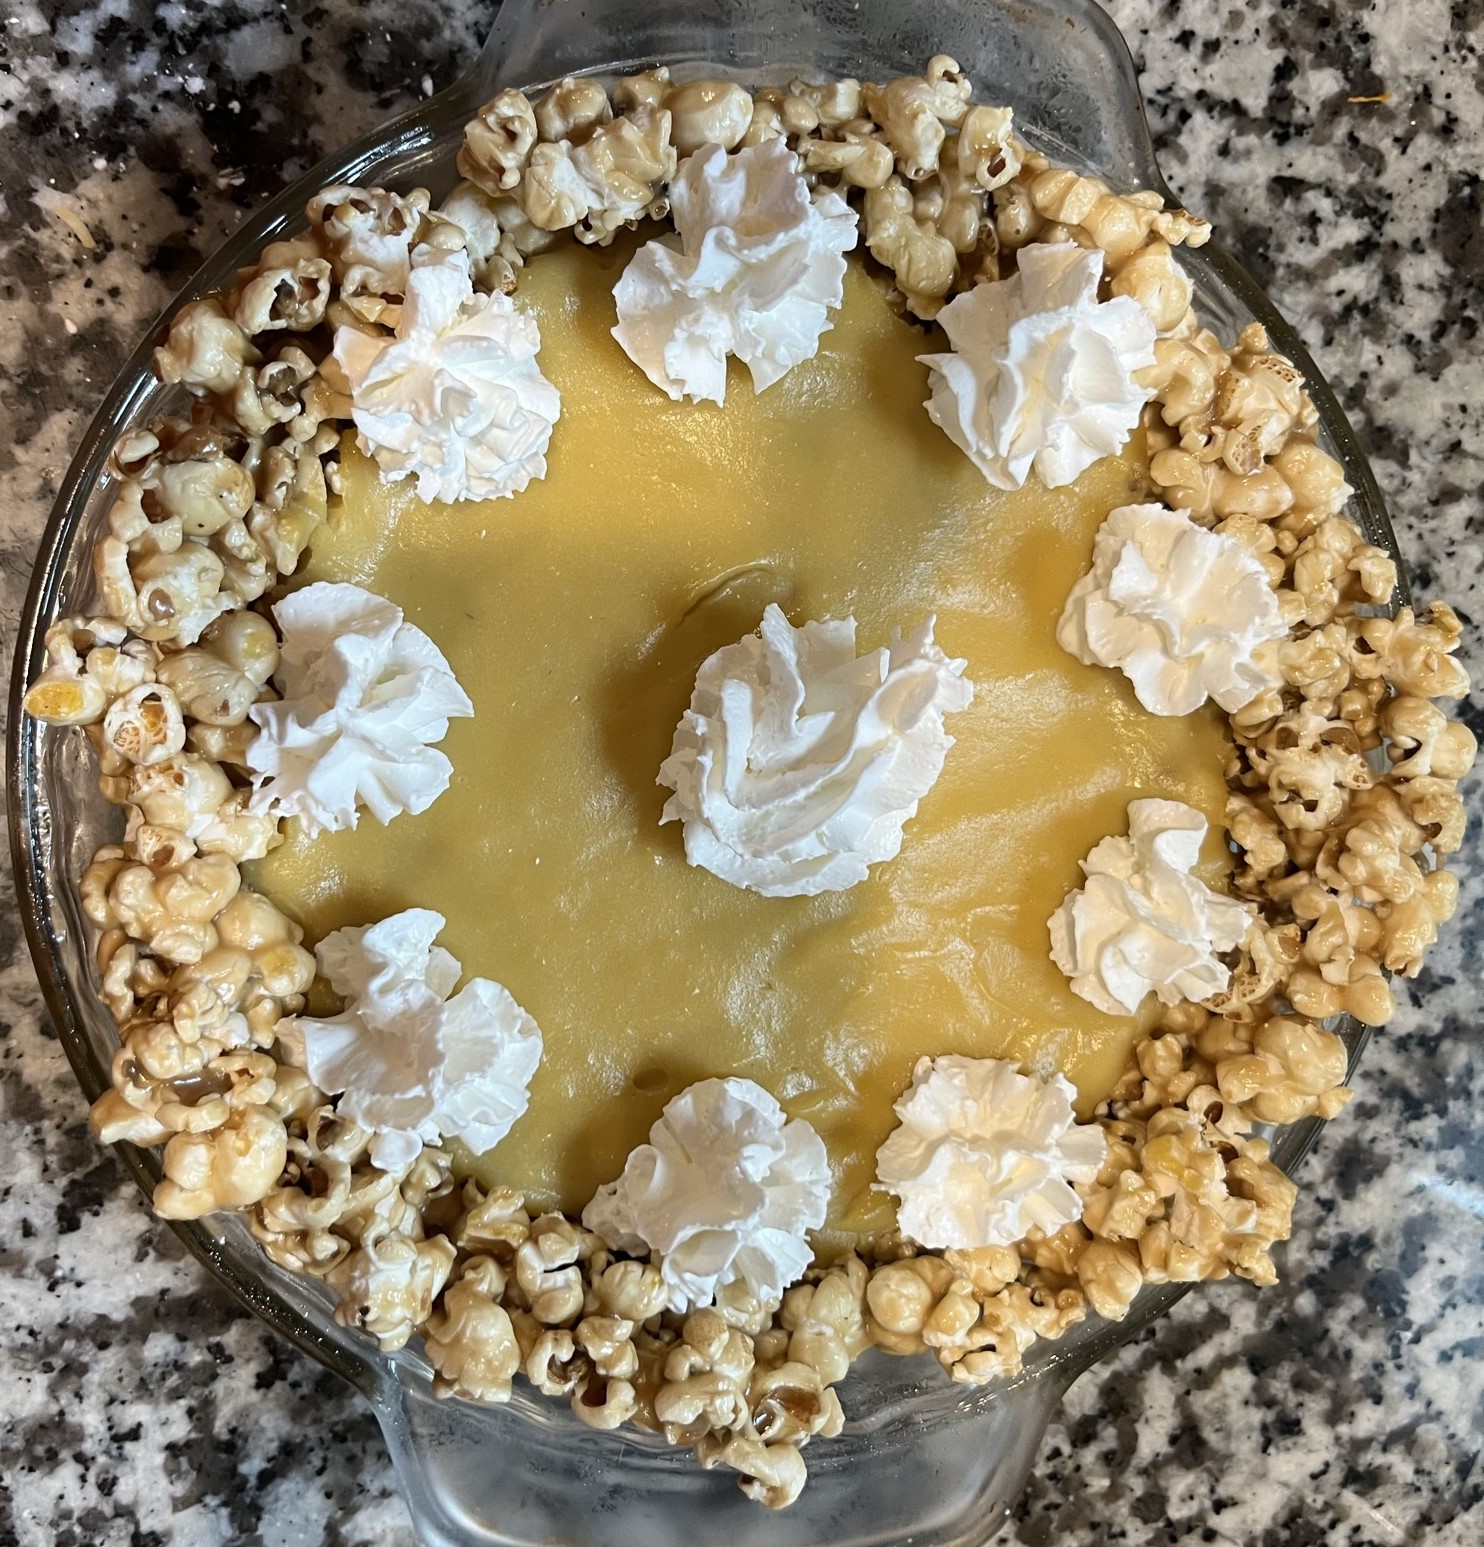 popcorn pie with a caramel corn crust, yellow popcorn custard filling, and whipped cream in a glass pie dish on a mottled granite countertop